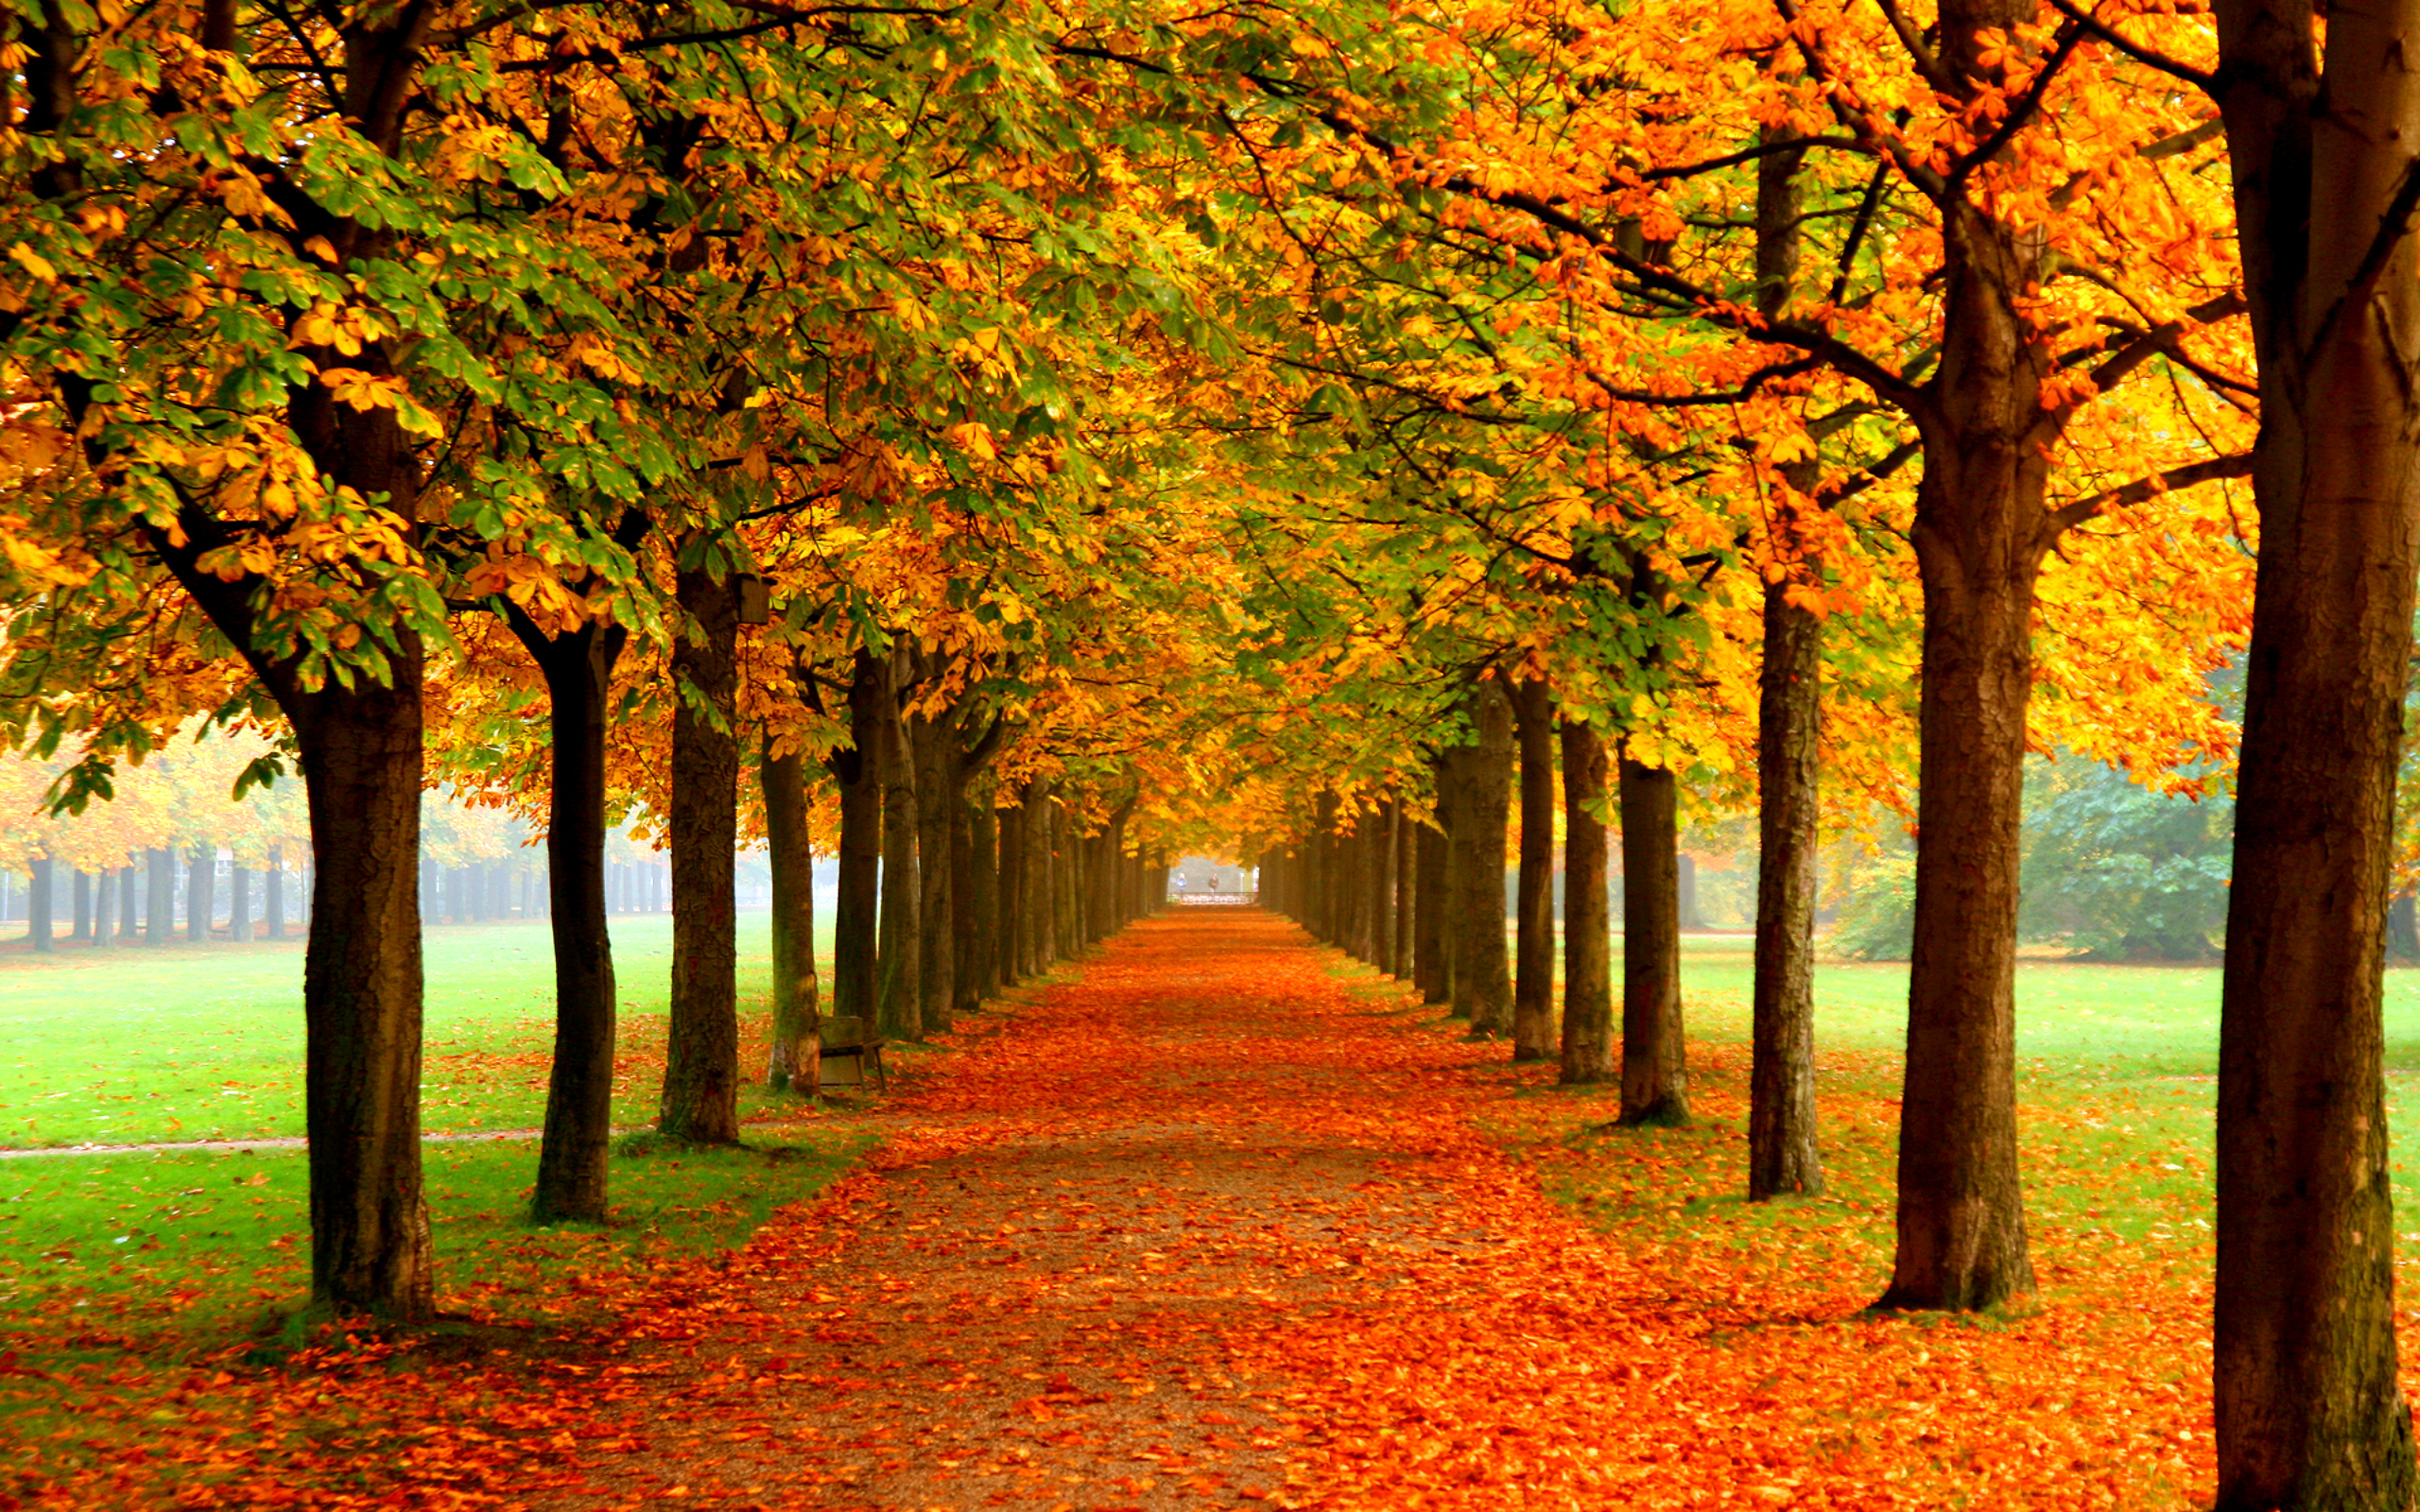 Autumn Free Wallpaper - Autumn Colors Wallpapers - HD Wallpapers 93076